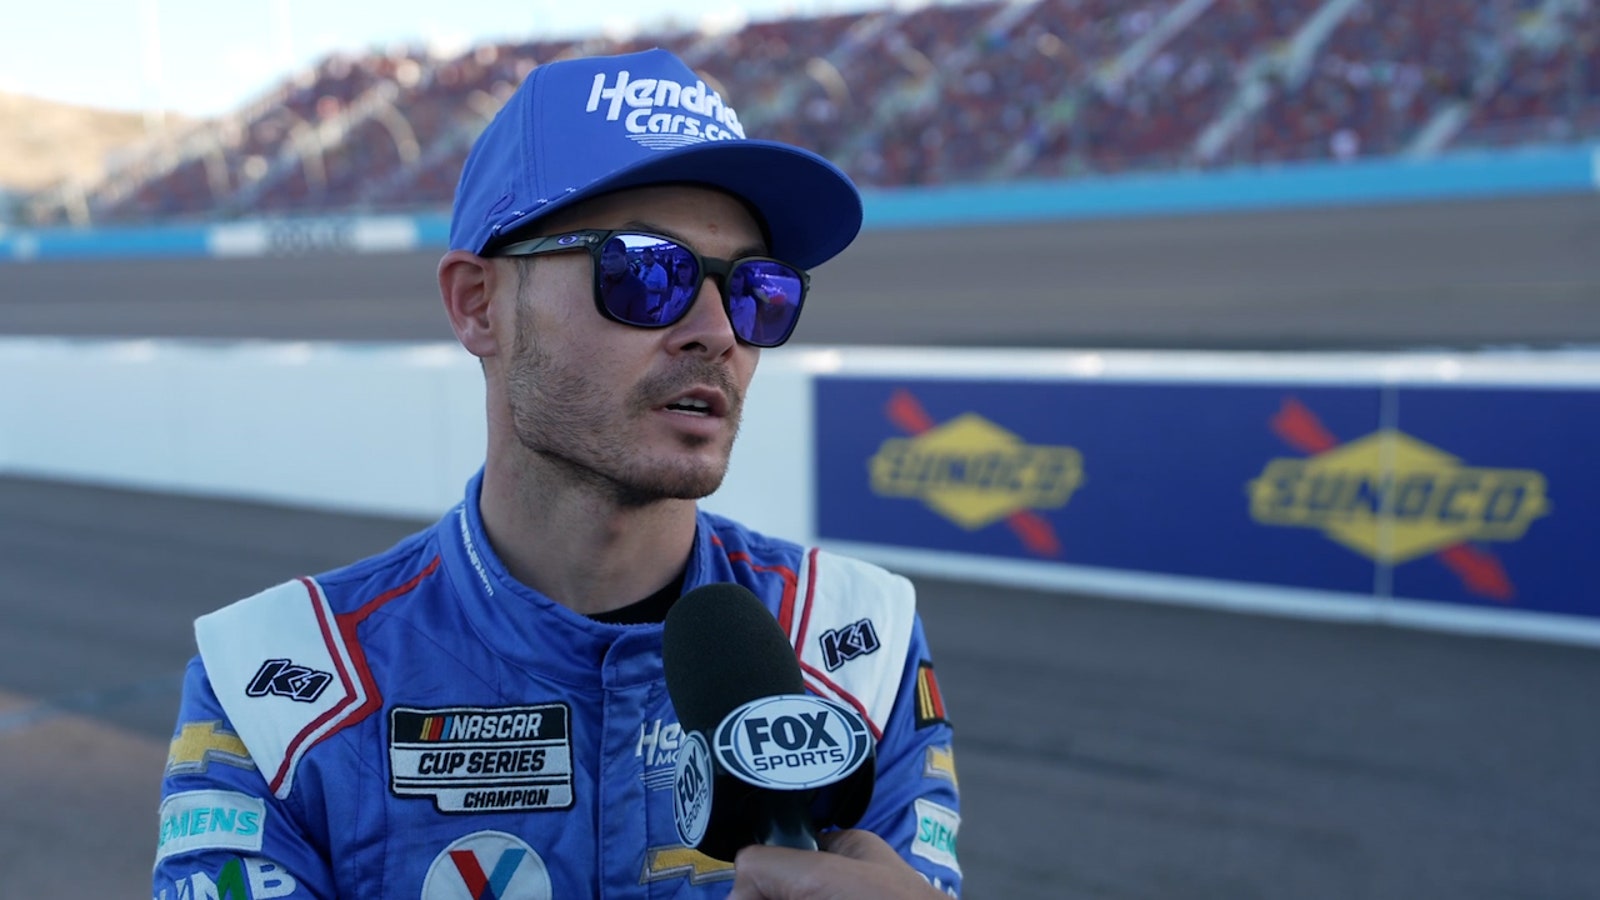 Kyle Larson on finishing second in the standings and on Ryan Blaney's title